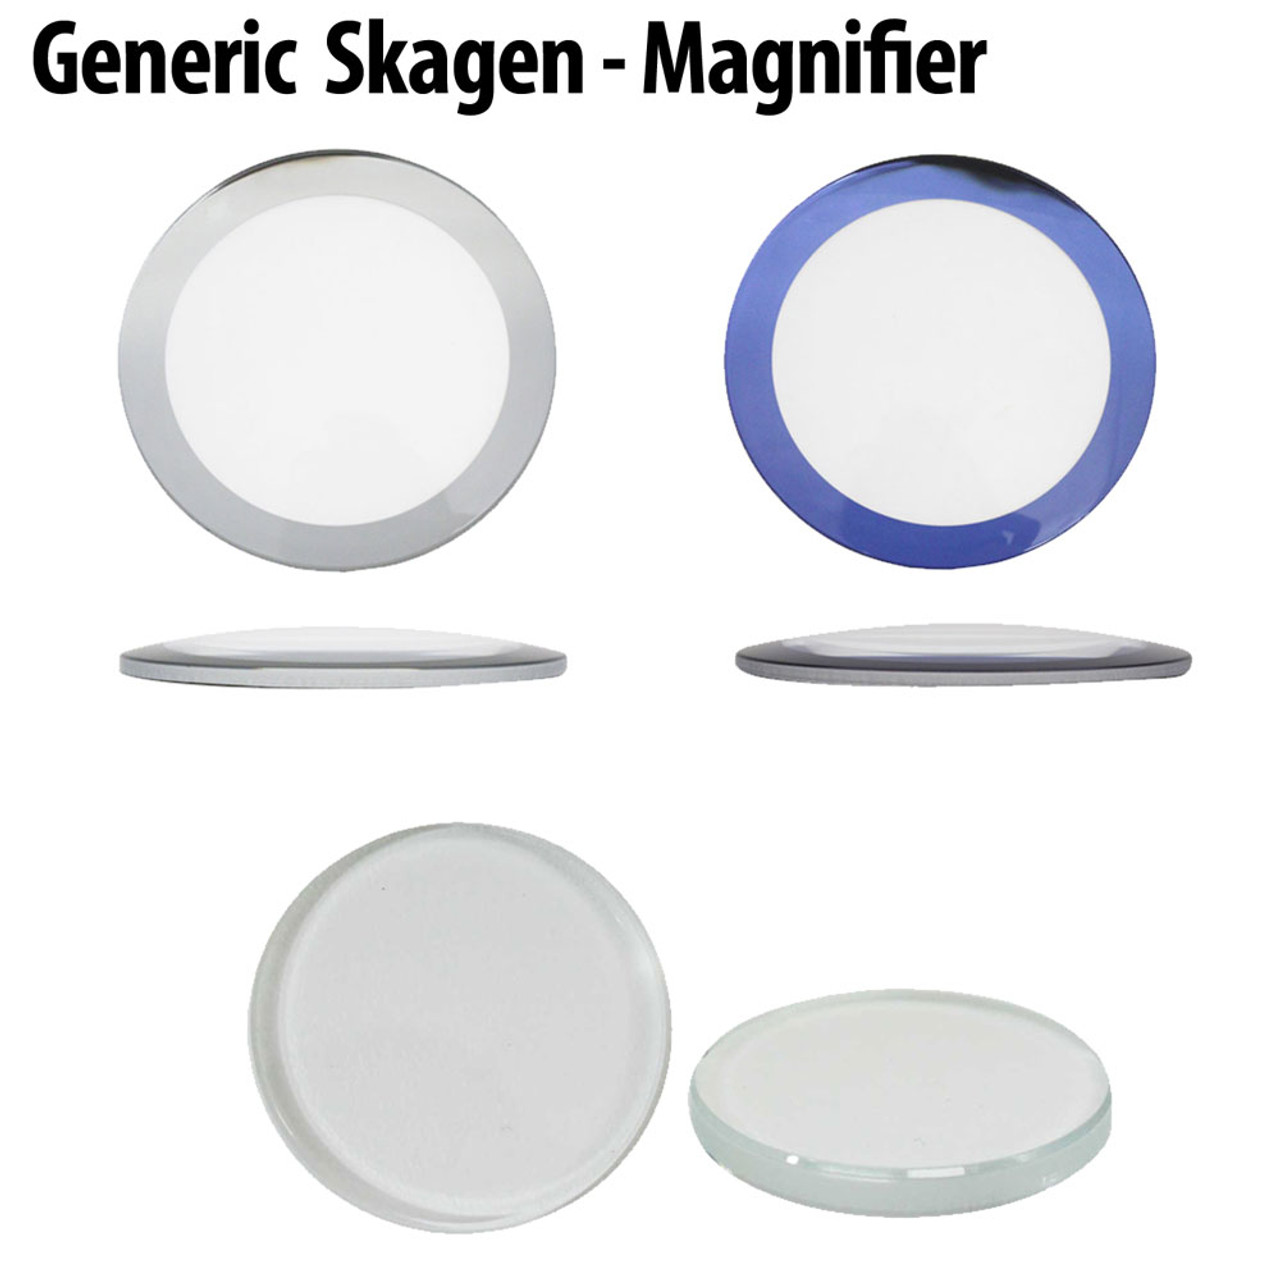 https://cdn11.bigcommerce.com/s-iic0hc/images/stencil/1280x1280/products/44607/77529/SKAGEN-MAGNIFIER-CRYSTALS__97103.1655166776.jpg?c=2